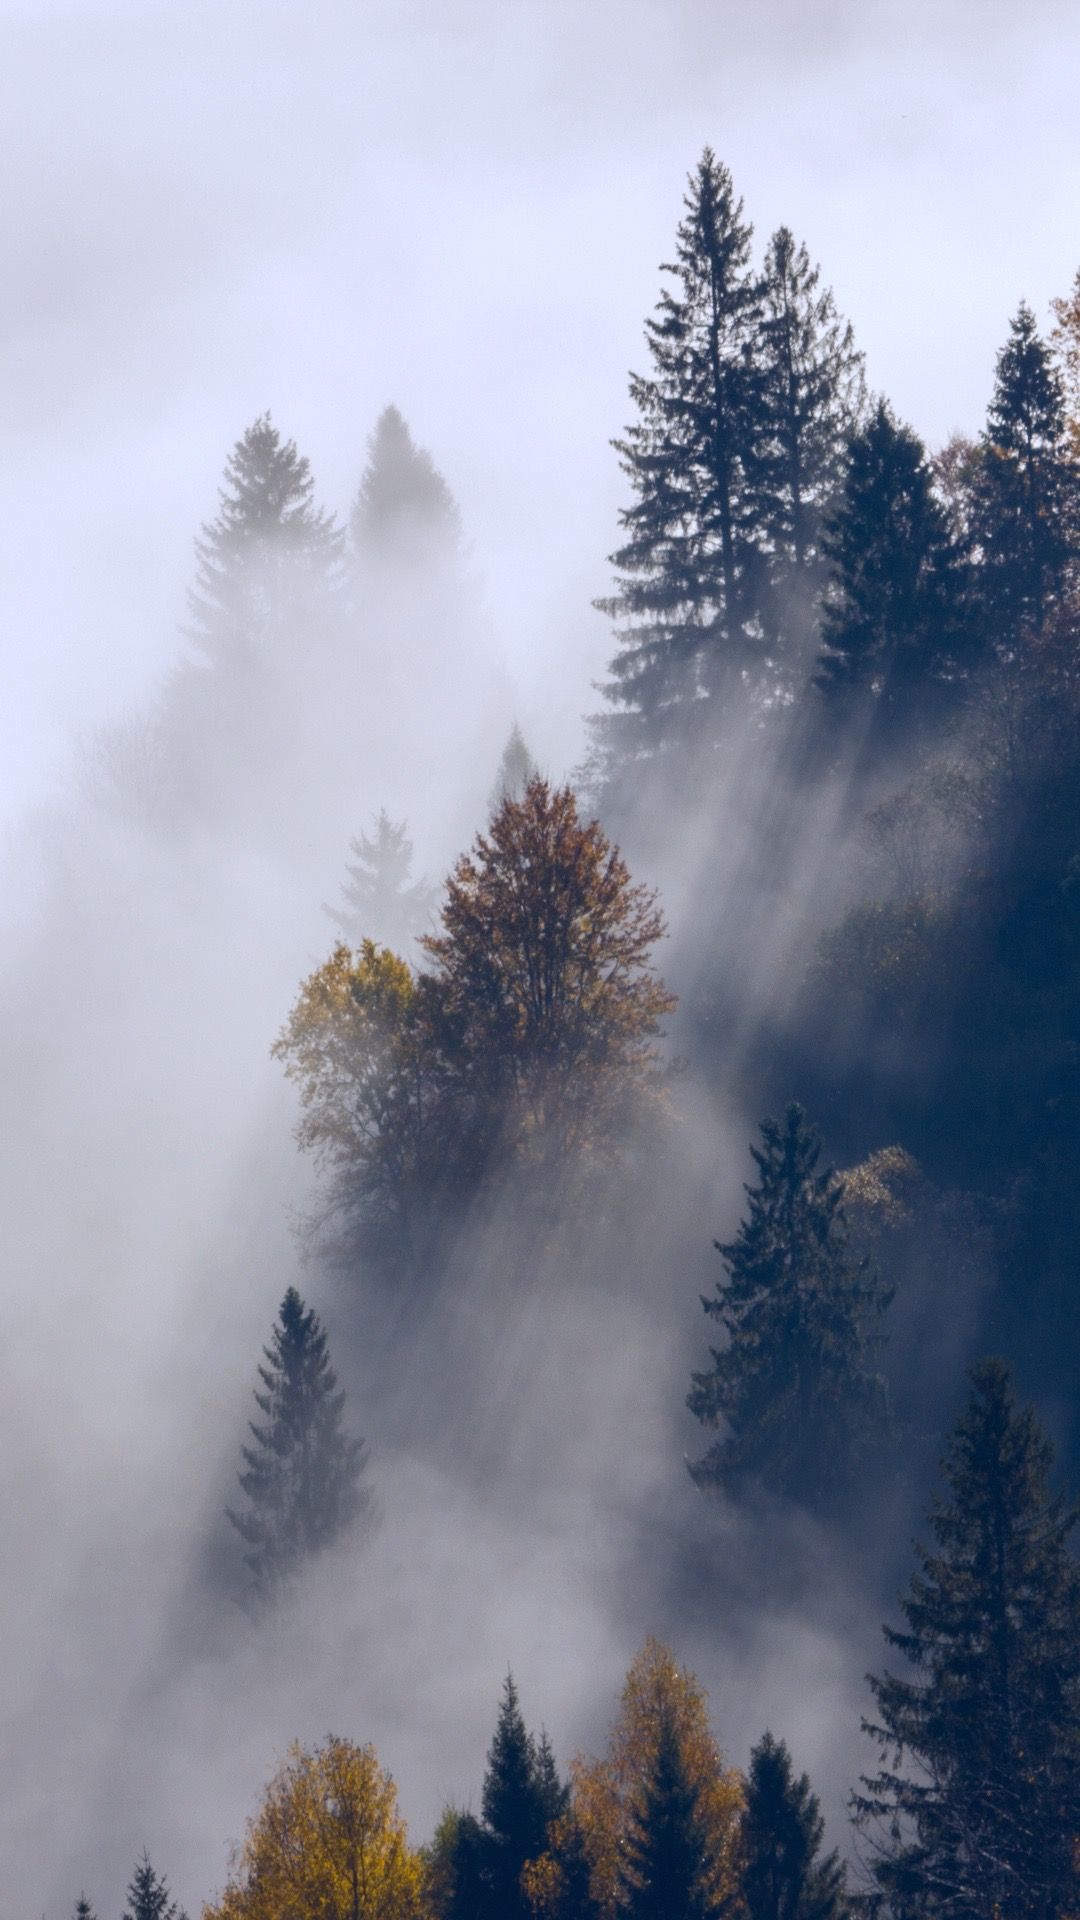 Foggy forest wallpaper. Forest wallpaper, Photography inspiration nature, Forest wallpaper iphone